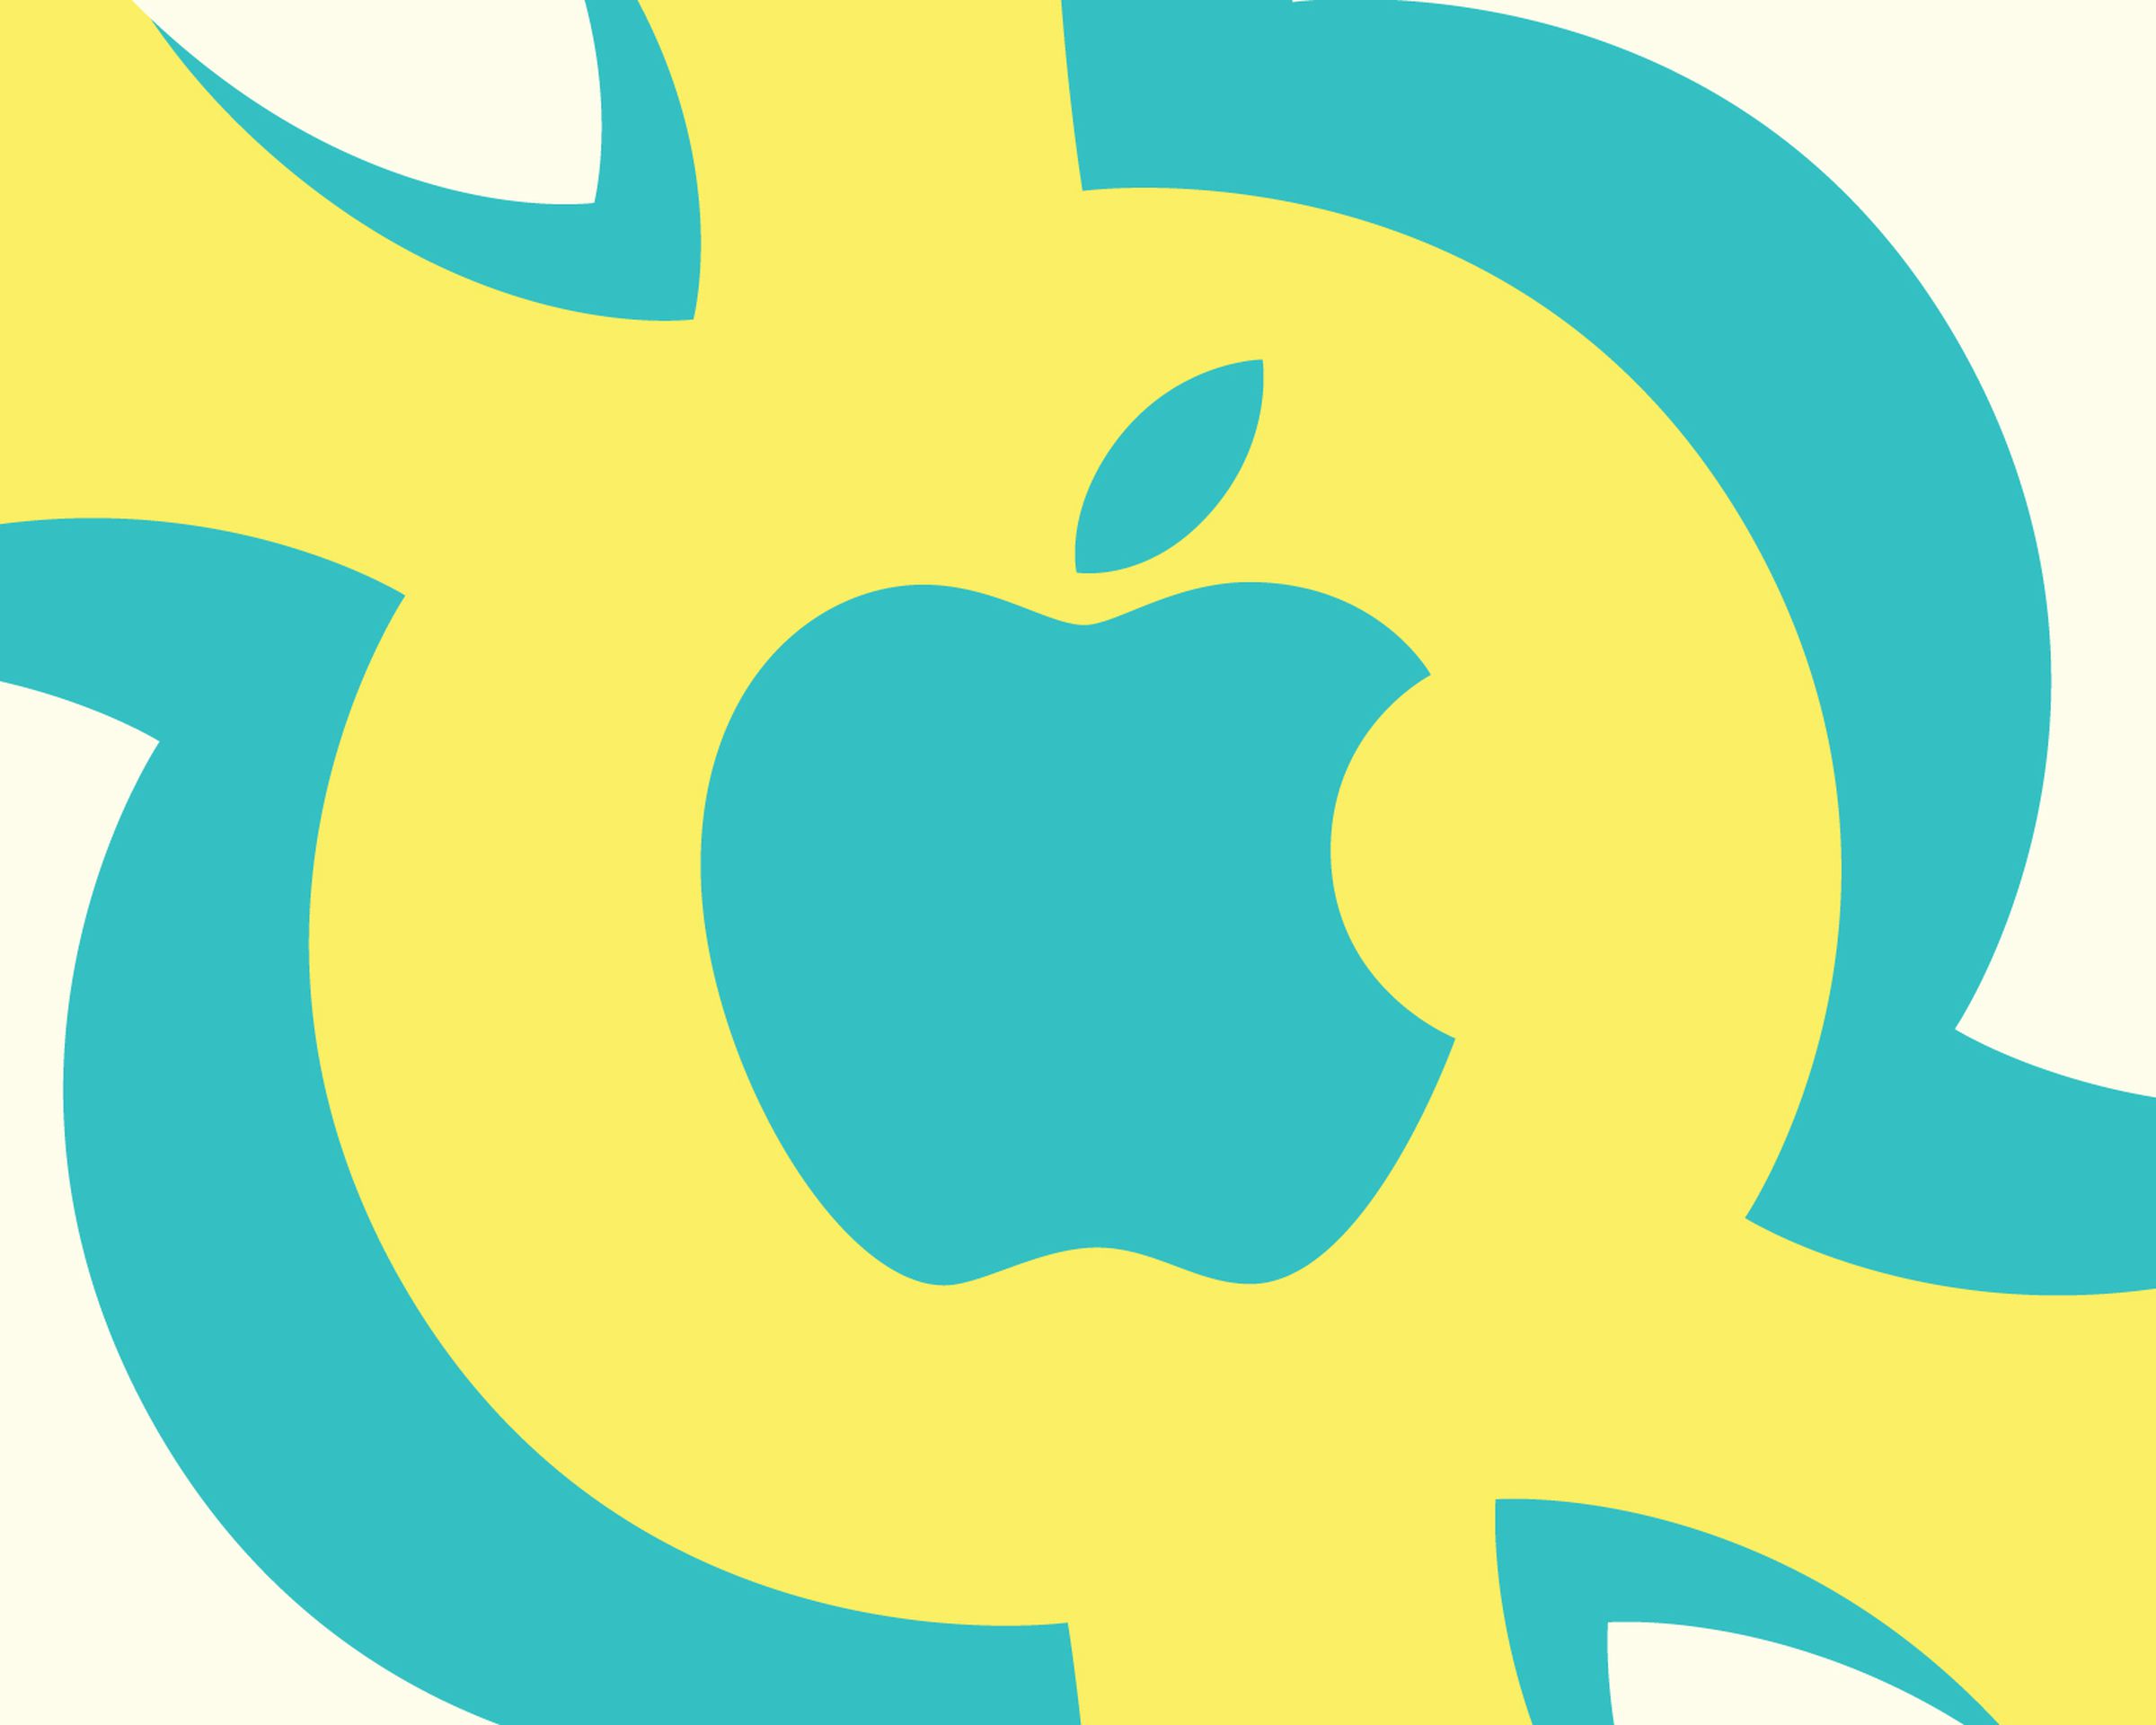 Illustration of the Apple logo on a yellow and teal background.